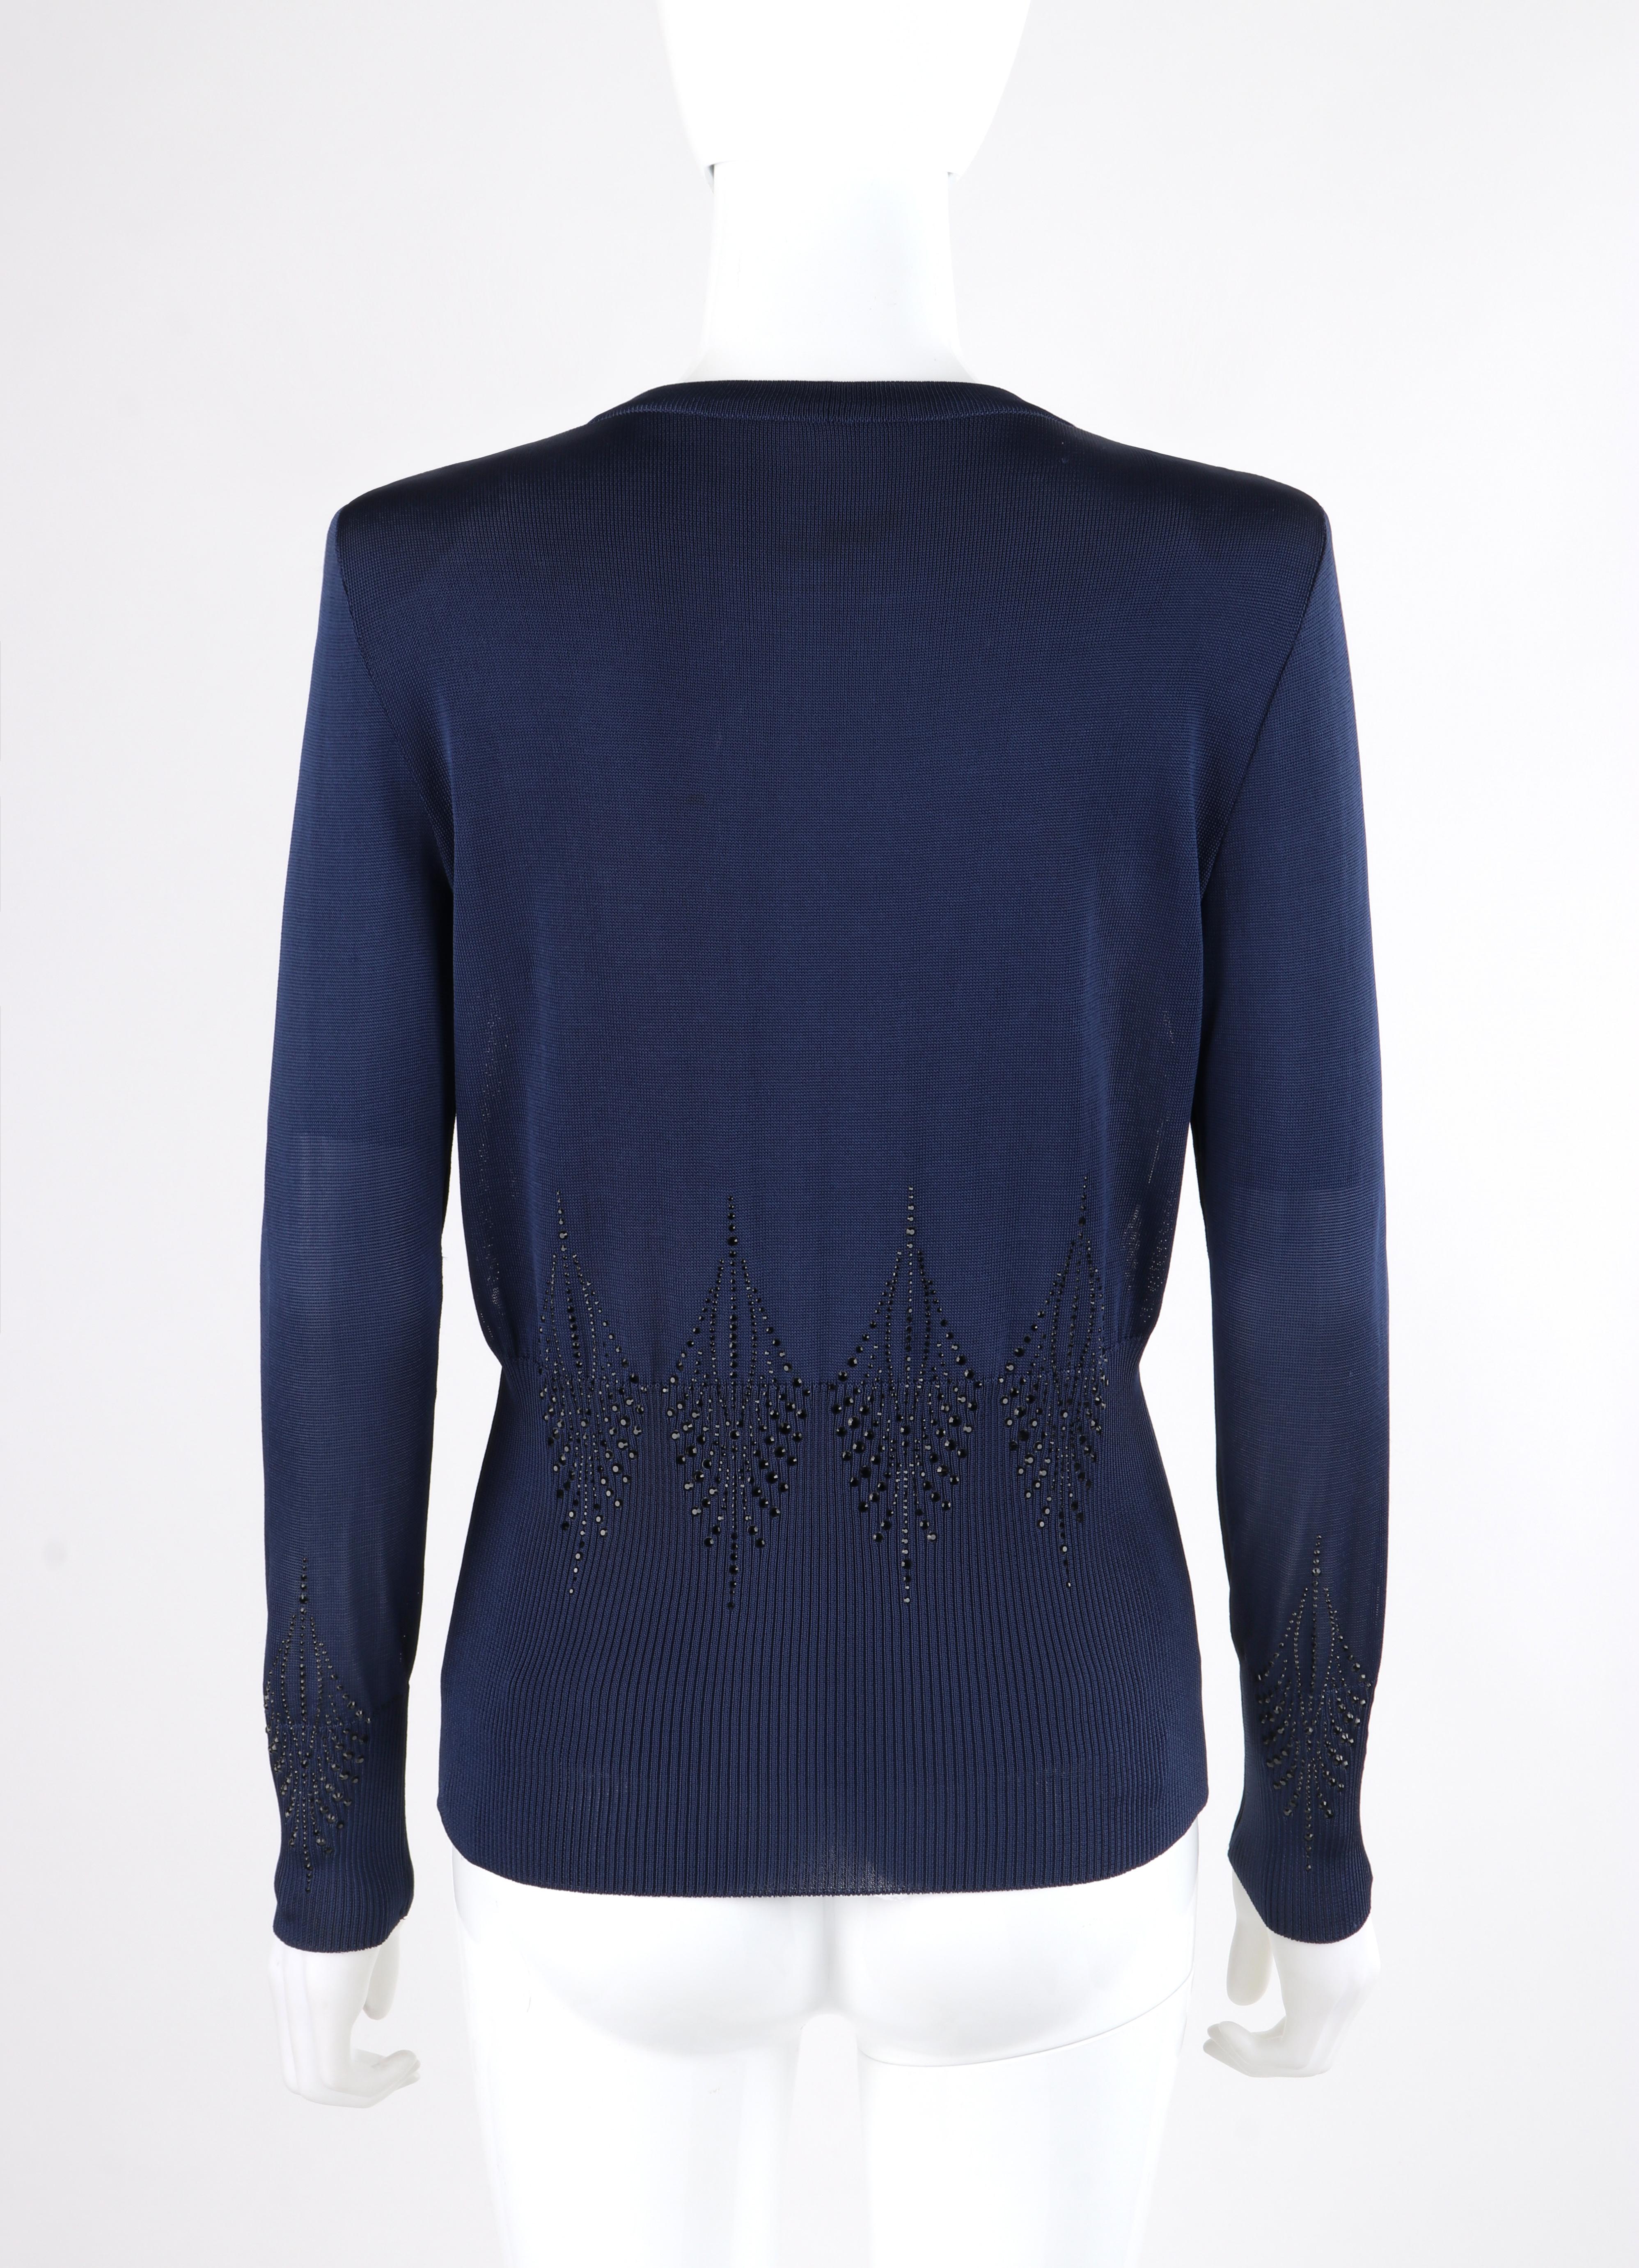 GIVENCHY Couture A/W 1998 ALEXANDER McQUEEN Embellished Knit Top Cardigan Set For Sale 1